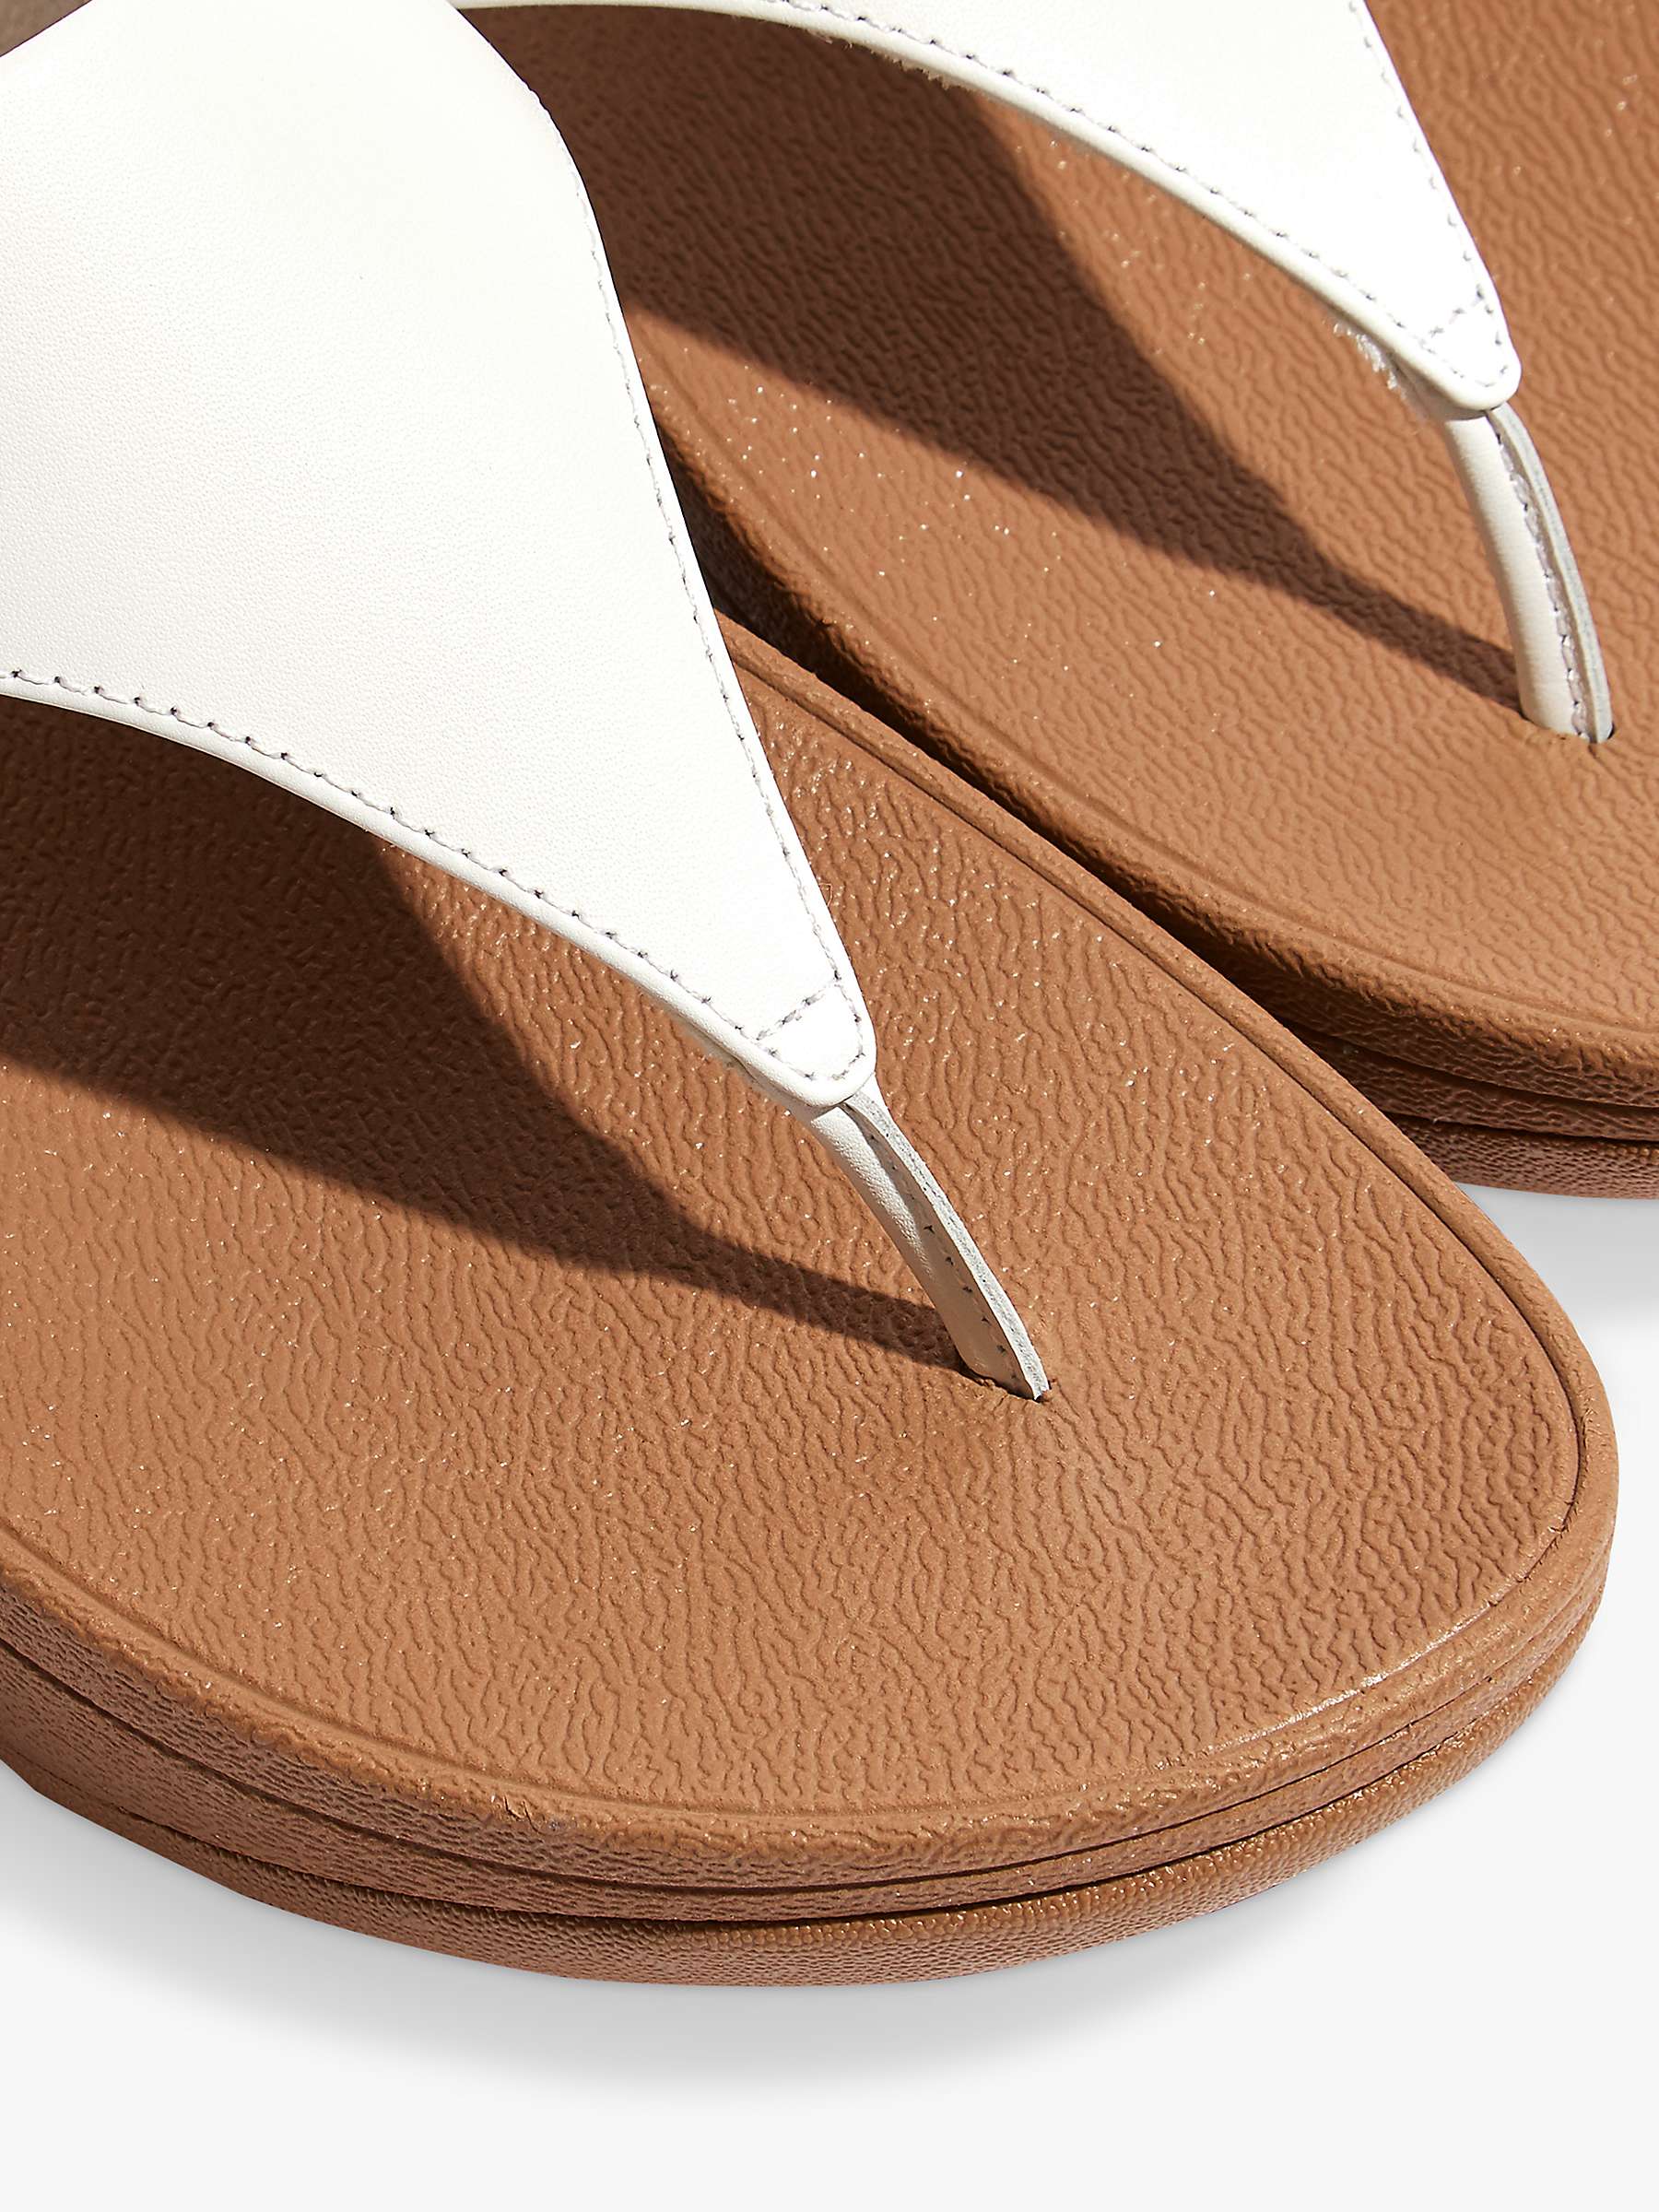 Buy FitFlop Lulu Toe Post Sandals, White Online at johnlewis.com